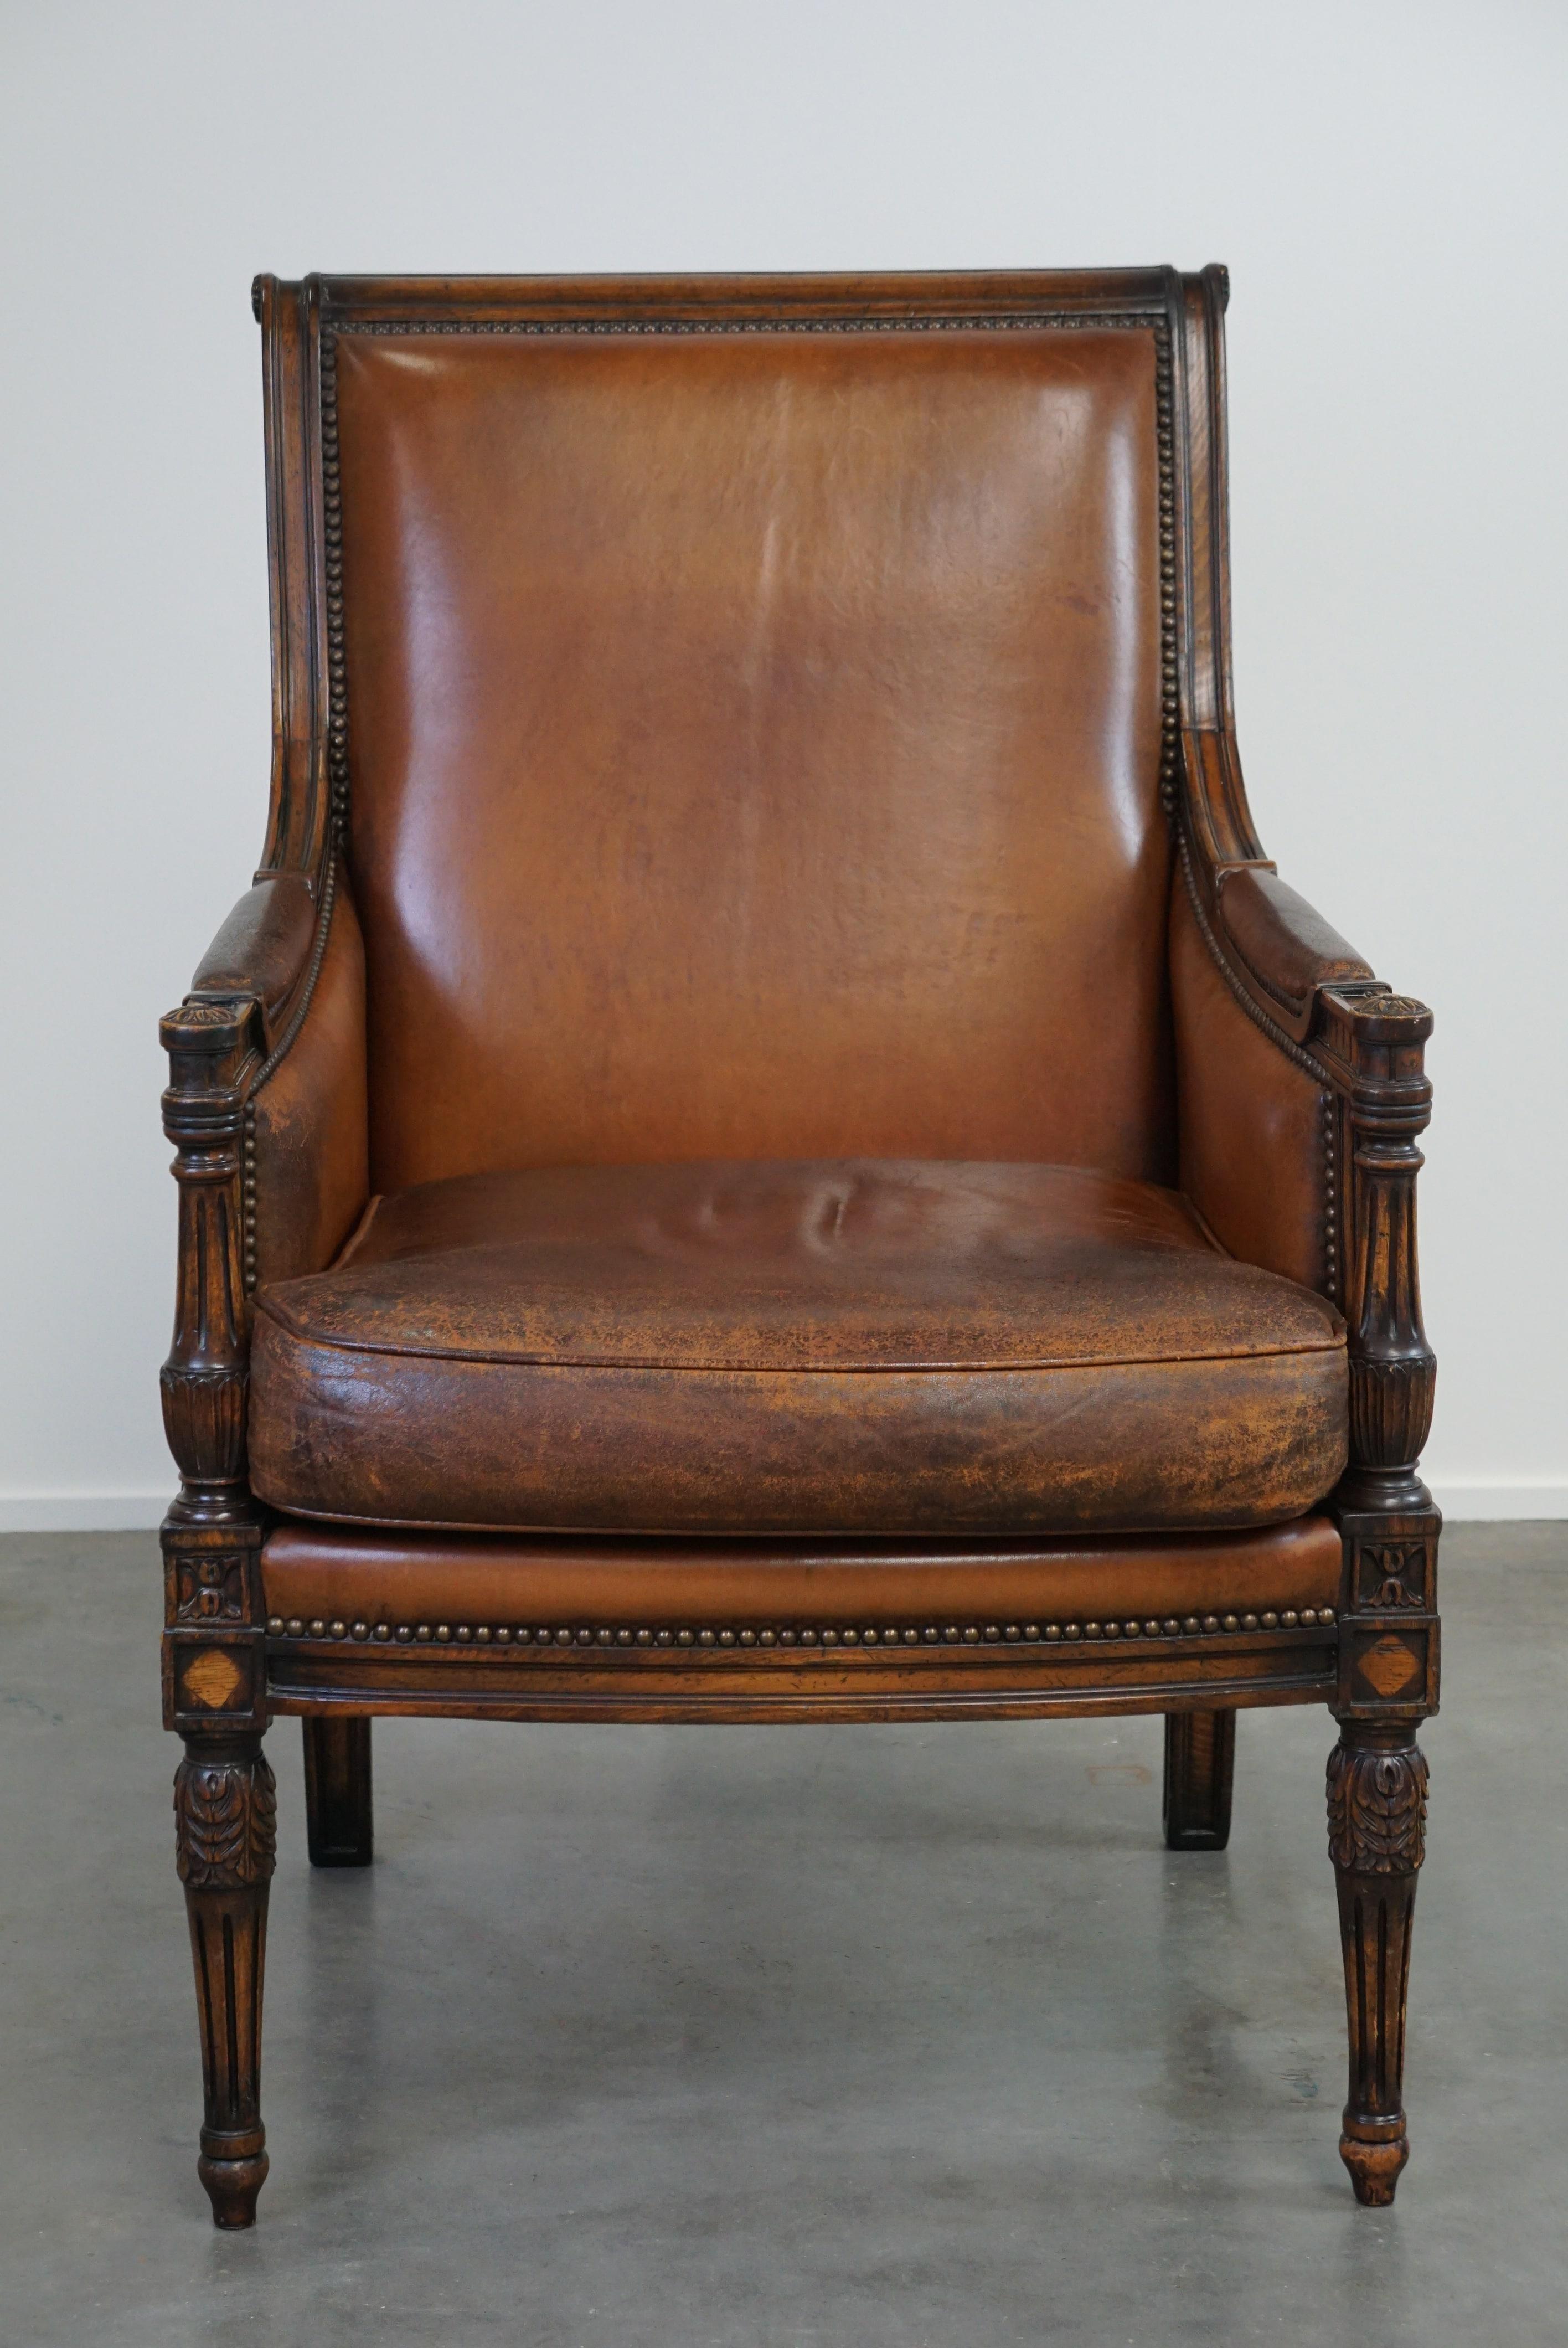 Dutch Charming classic sheep leather armchair with wood carving and a nice patina For Sale